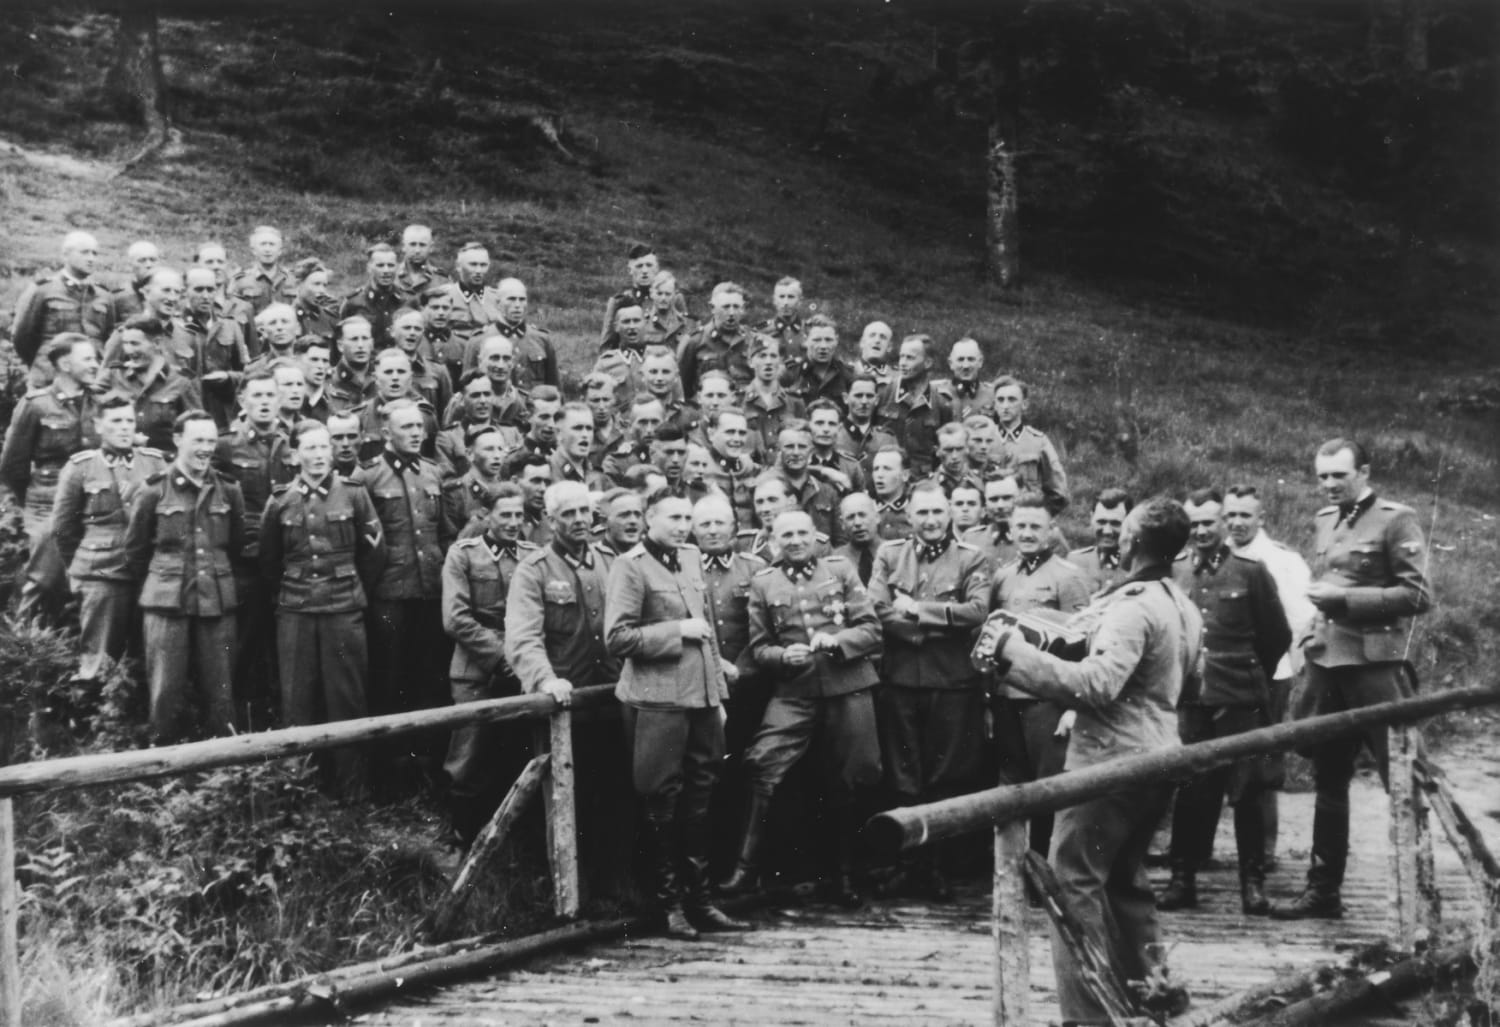 An accordionist leads a sing-along for SS officers at their retreat outside Auschwitz. The men in the front row, which include Rudolf Höss and Josef Mengele, were responsible for killing millions. Another, Otto Moll, burned infants alive and is suspected of over 20,000 murders, 1944 .